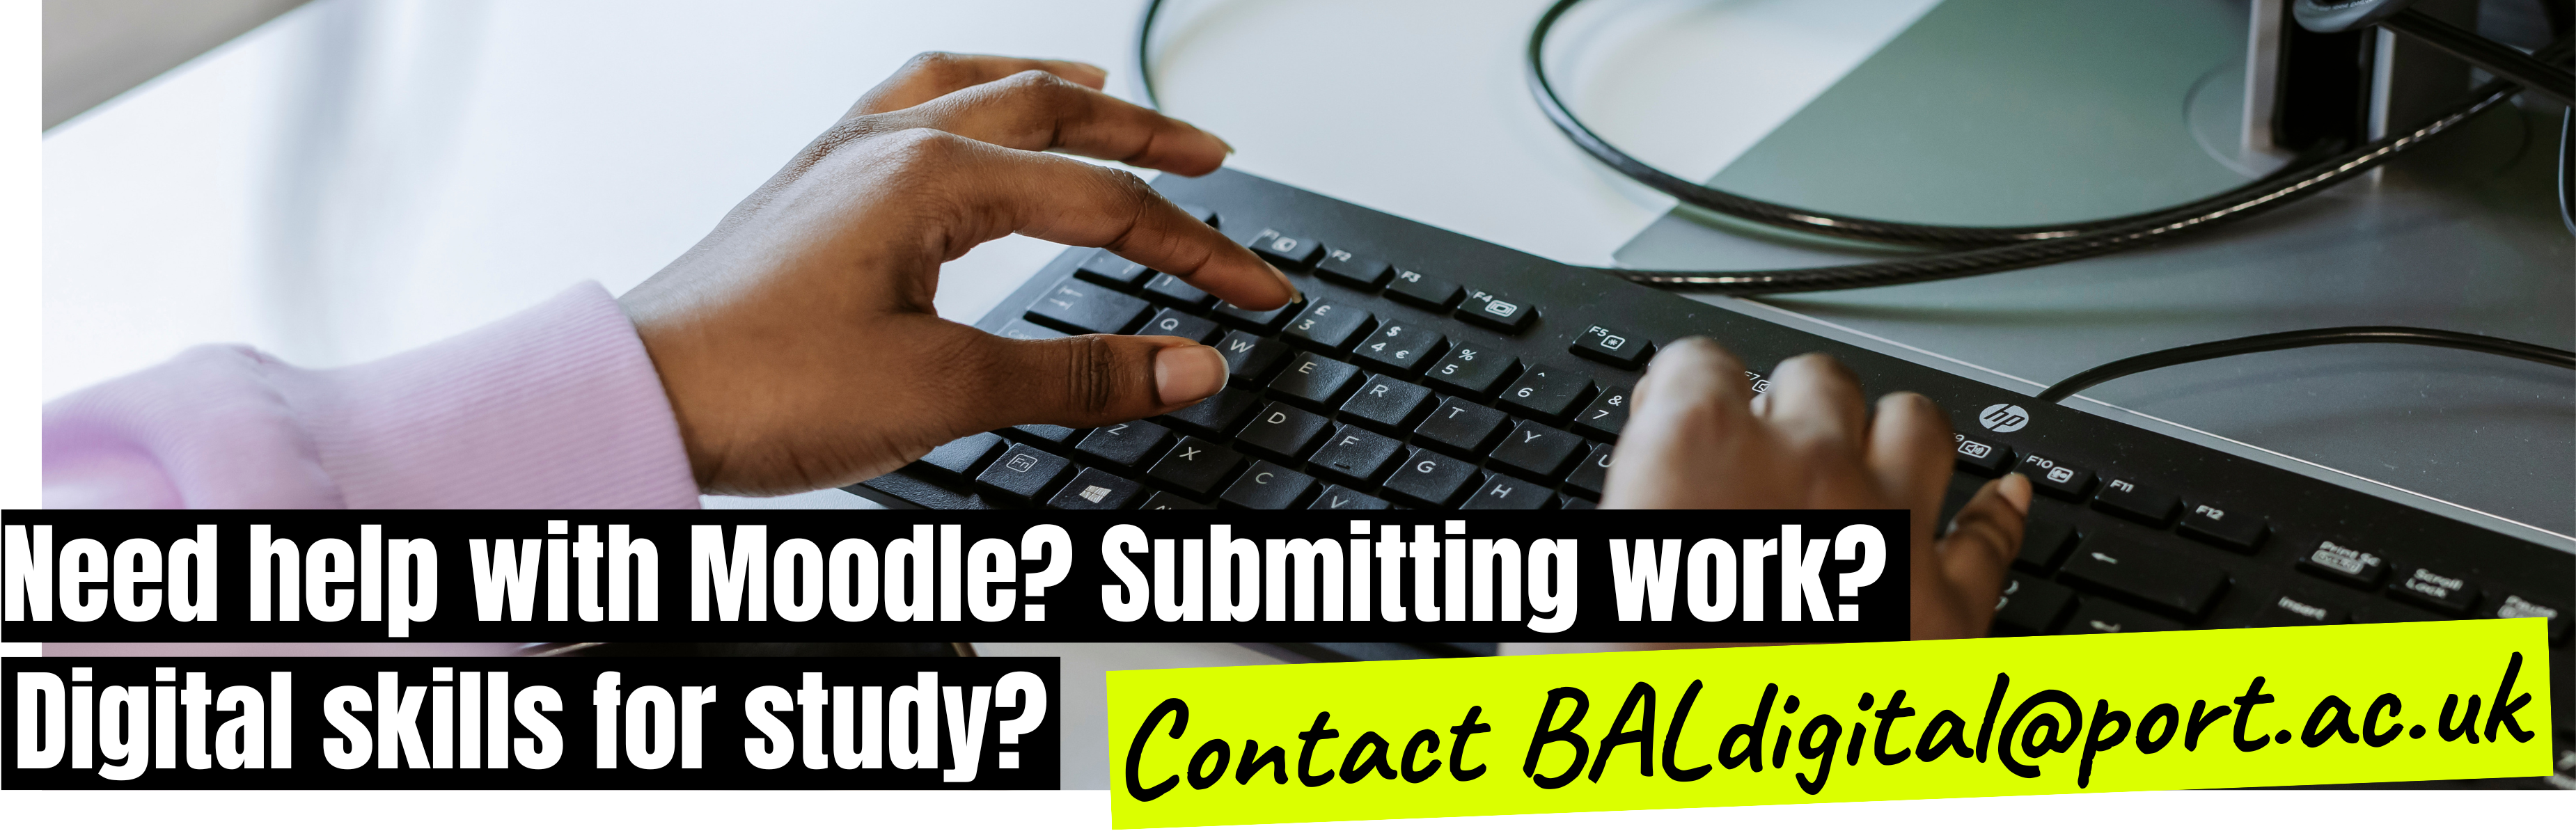 Contact BAL Digital for help with Moodle